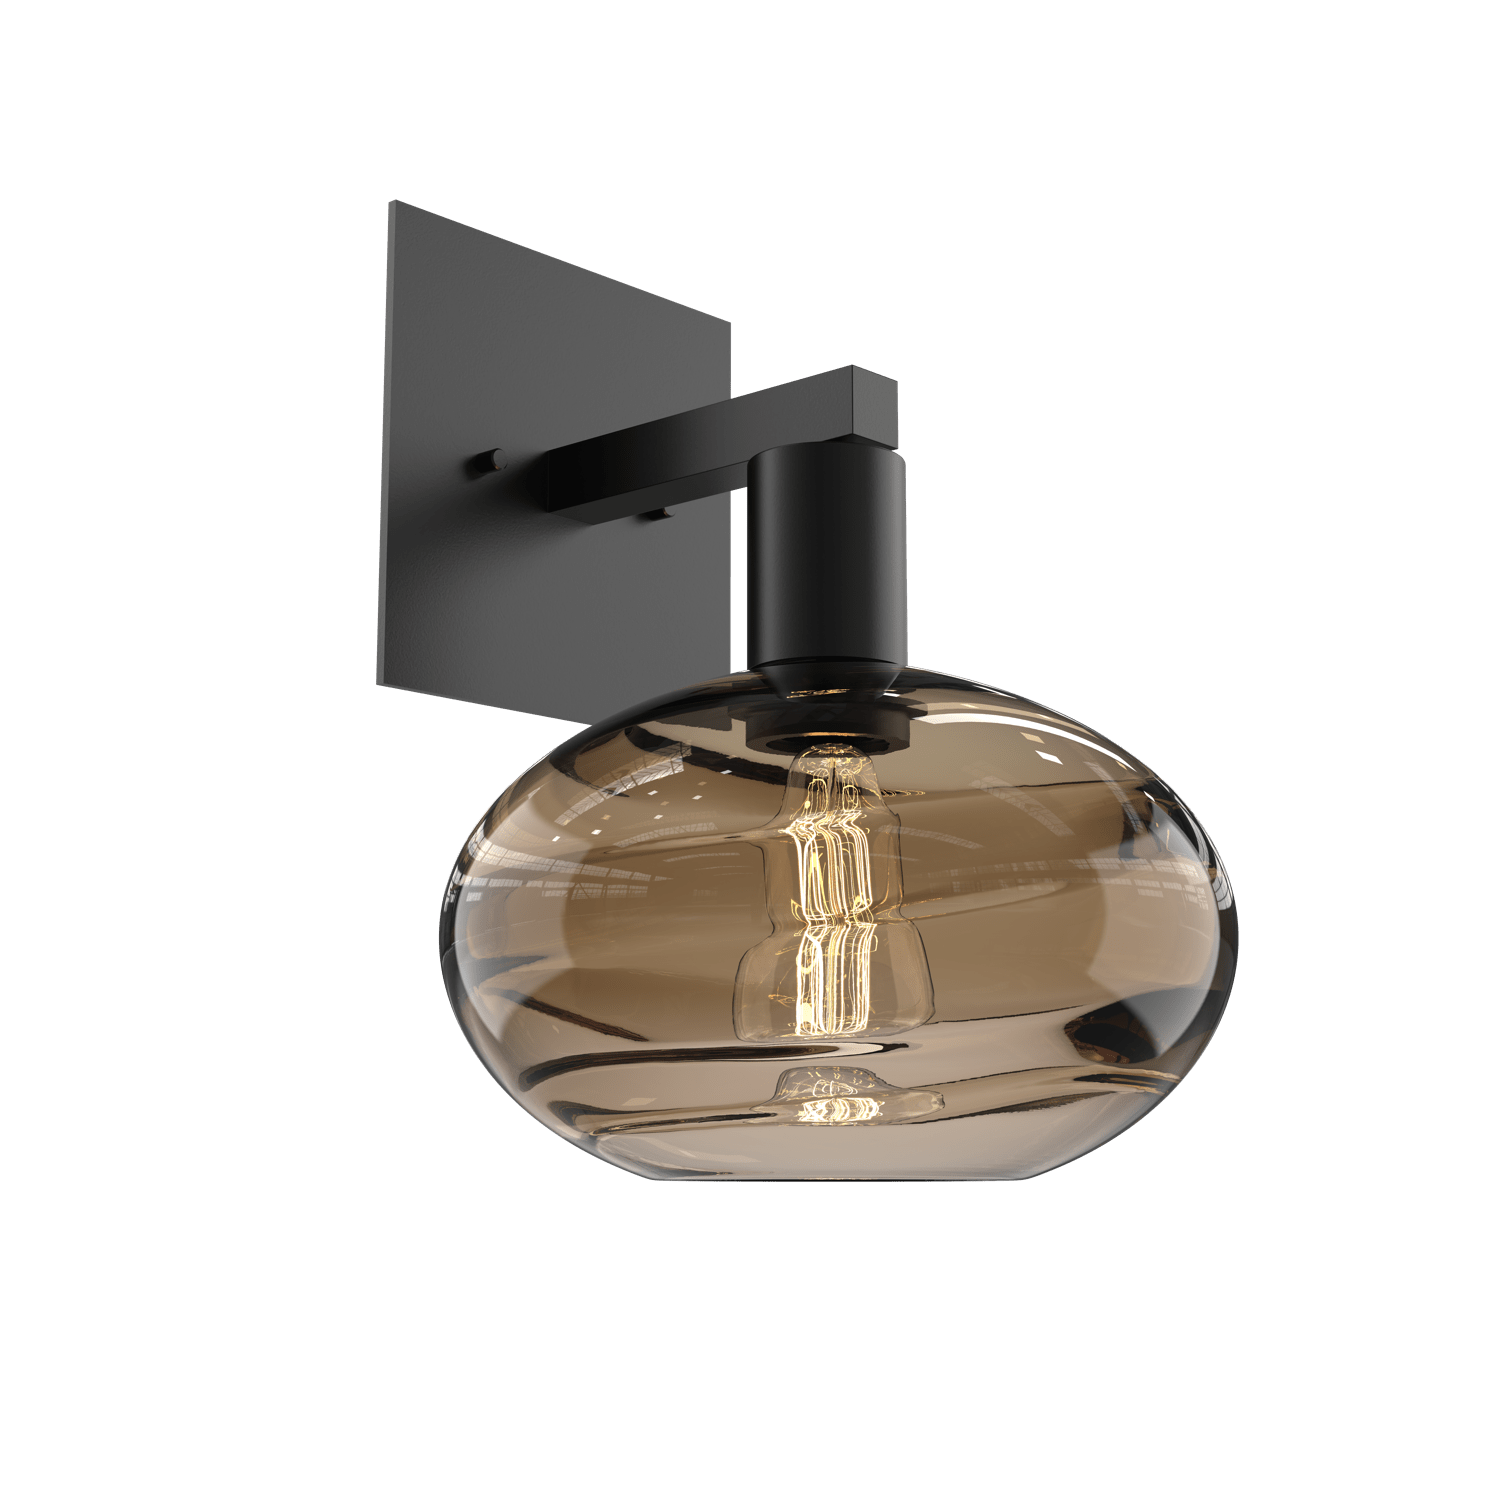 IDB0036-11-MB-OB-Hammerton-Studio-Optic-Blown-Glass-Coppa-wall-sconce-with-matte-black-finish-and-optic-bronze-blown-glass-shades-and-incandescent-lamping